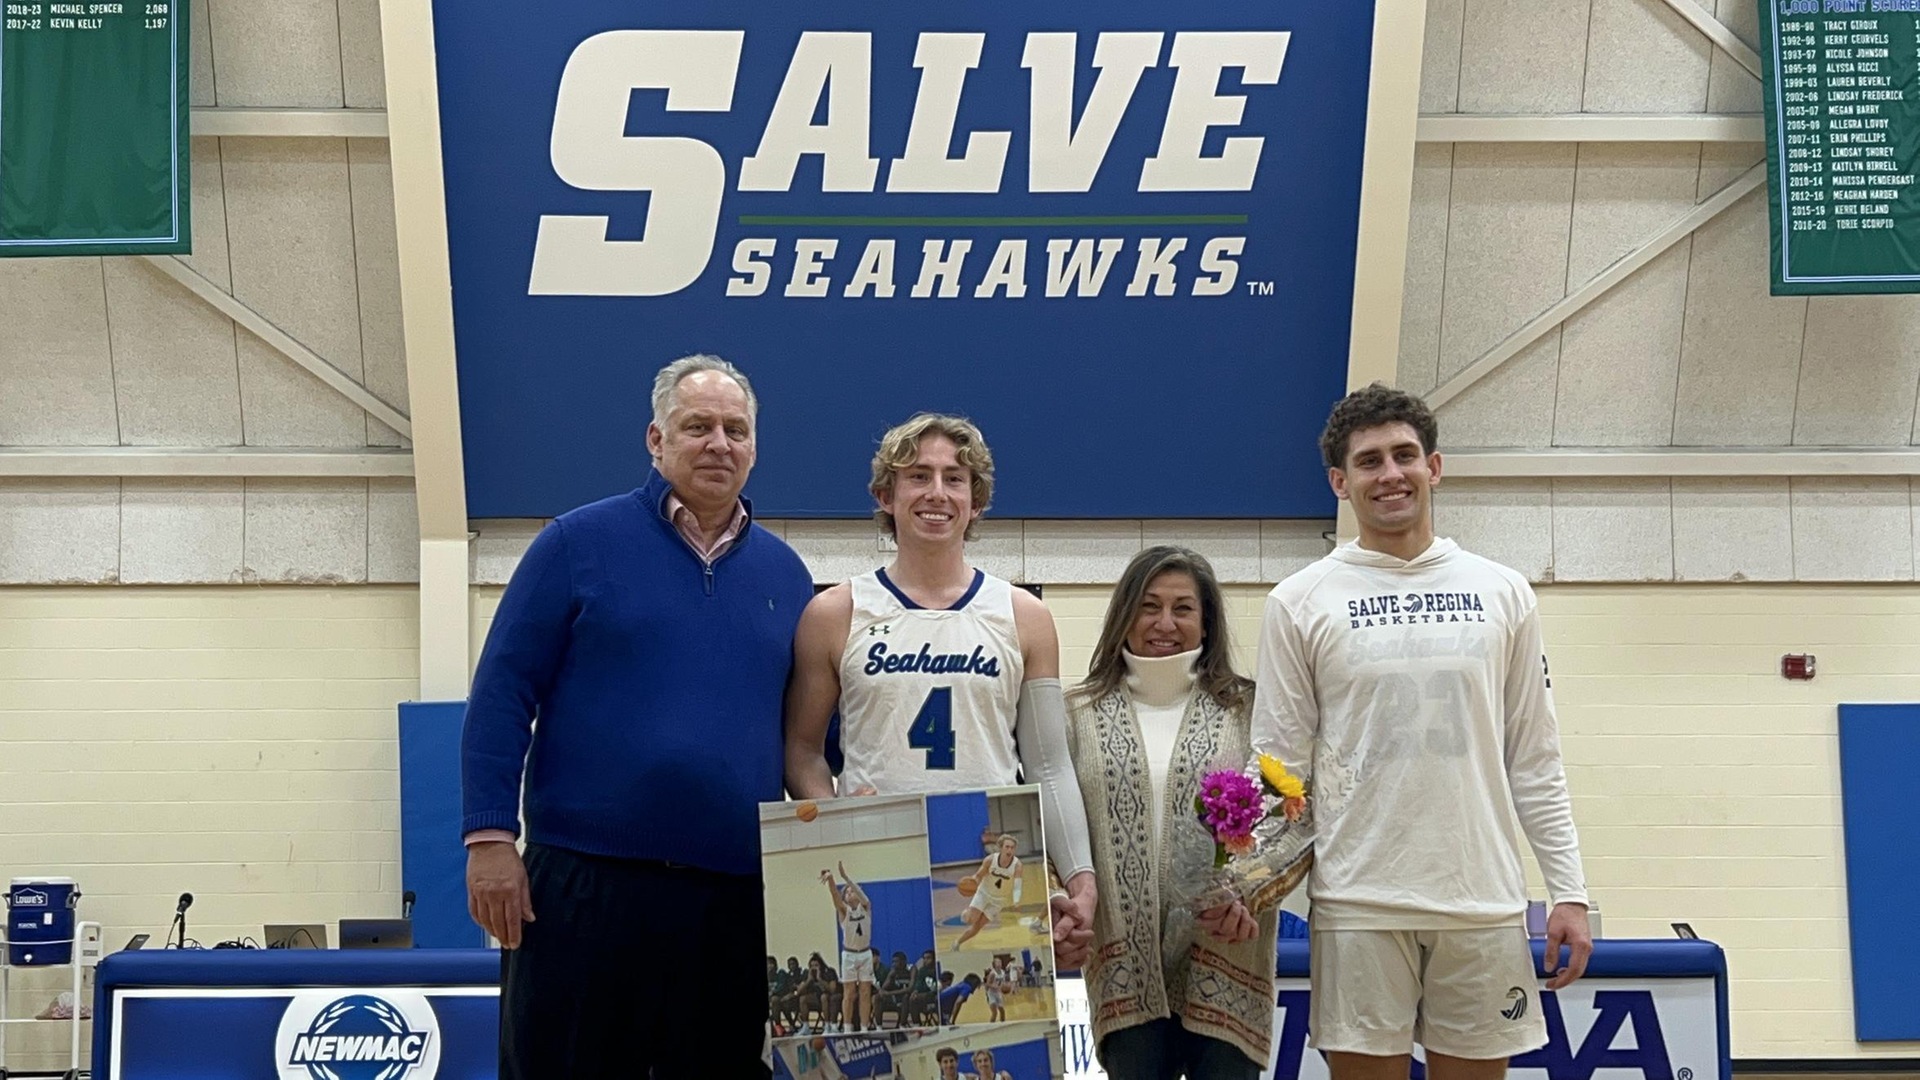 Clay Brochu (#4) joined by his father (Mark), mother (Josie), and brother (Braden) during pre-game ceremonies honoring the Seahawks' senior member.